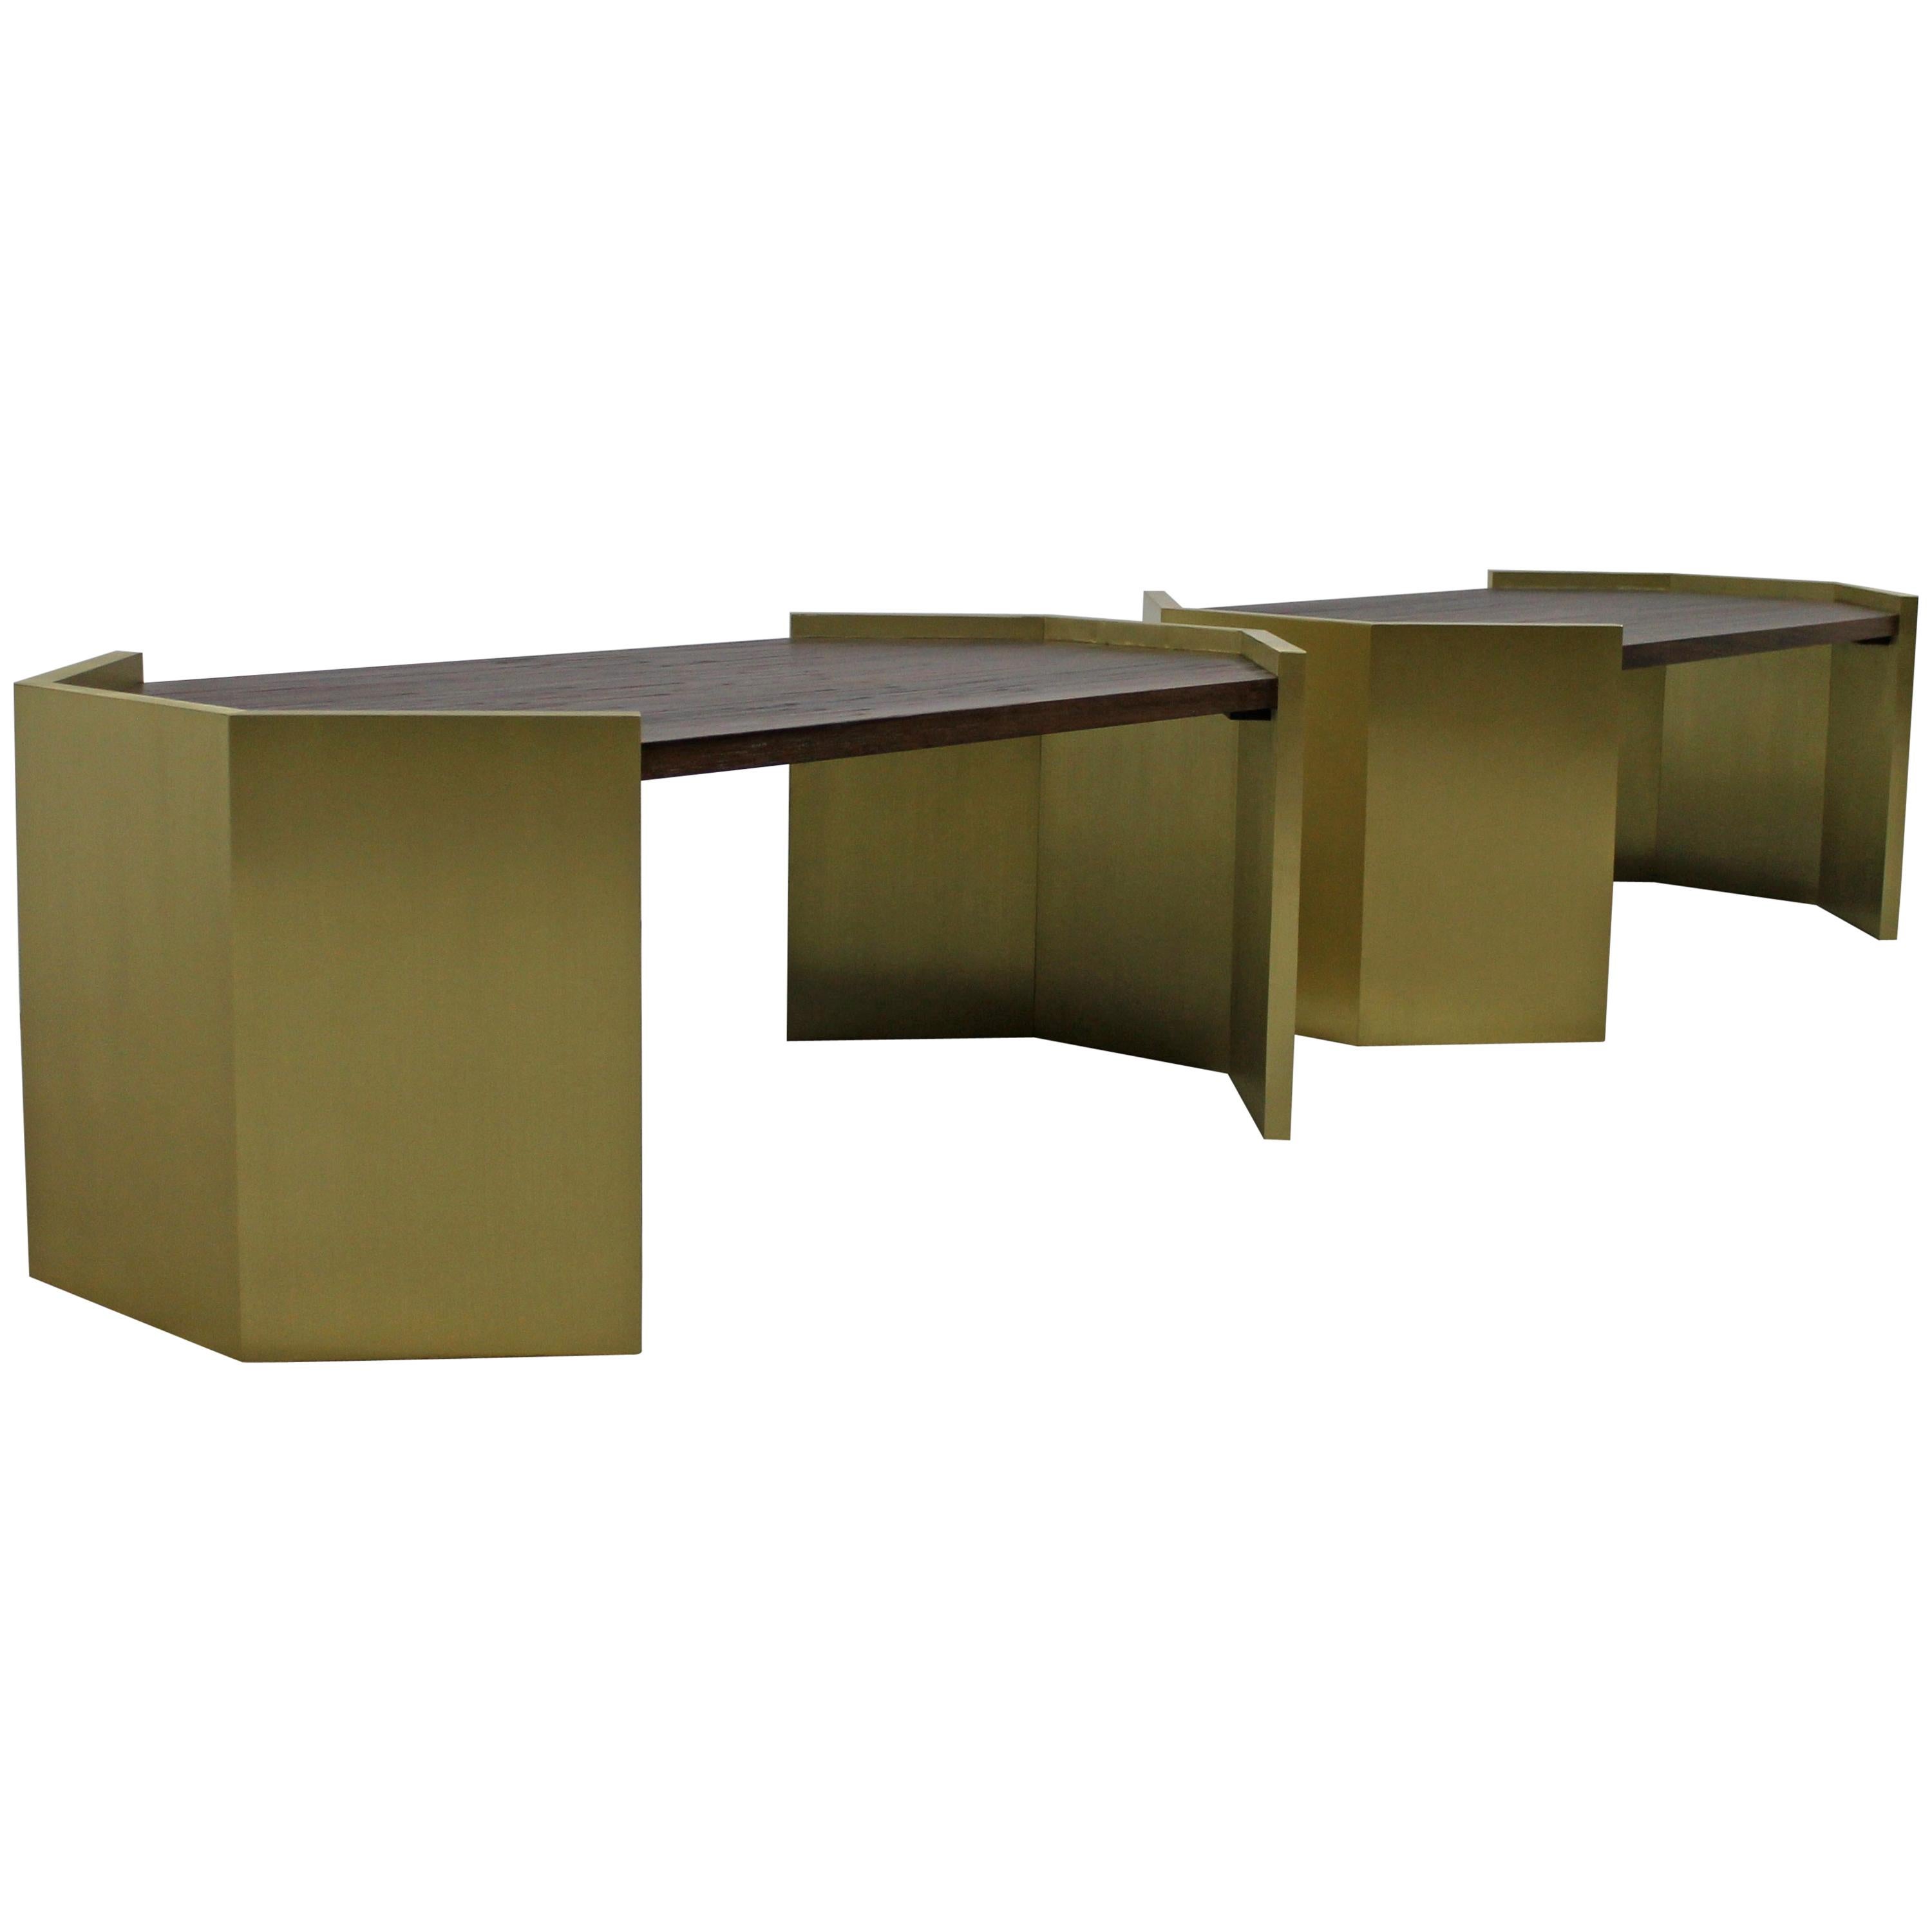 Pair of Brass and Wood Coffee Tables by Costantini for Robert AM Stern